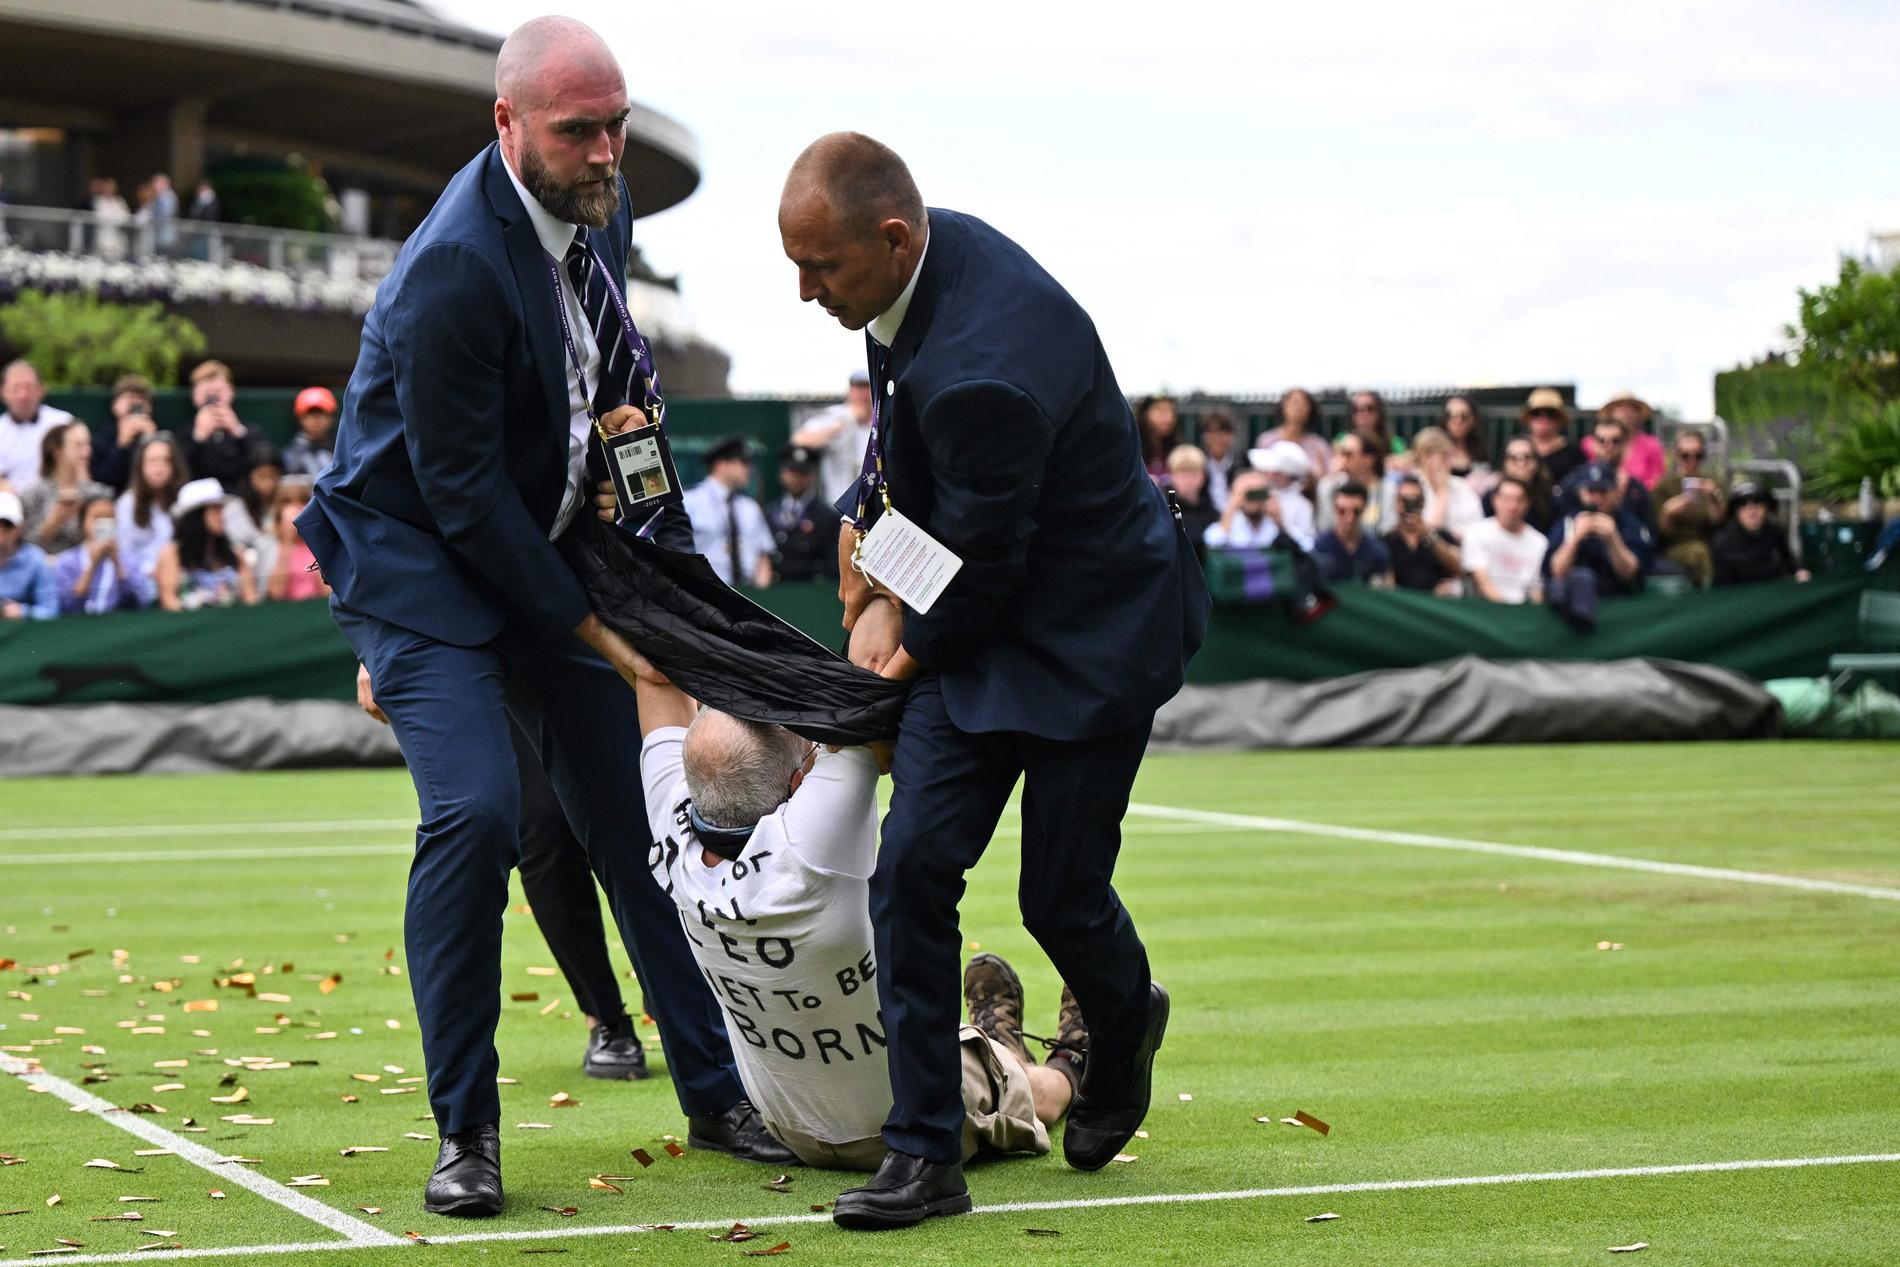 TENNIS PROTEST: Activists expelled during this summer's Wimbledon tournament.